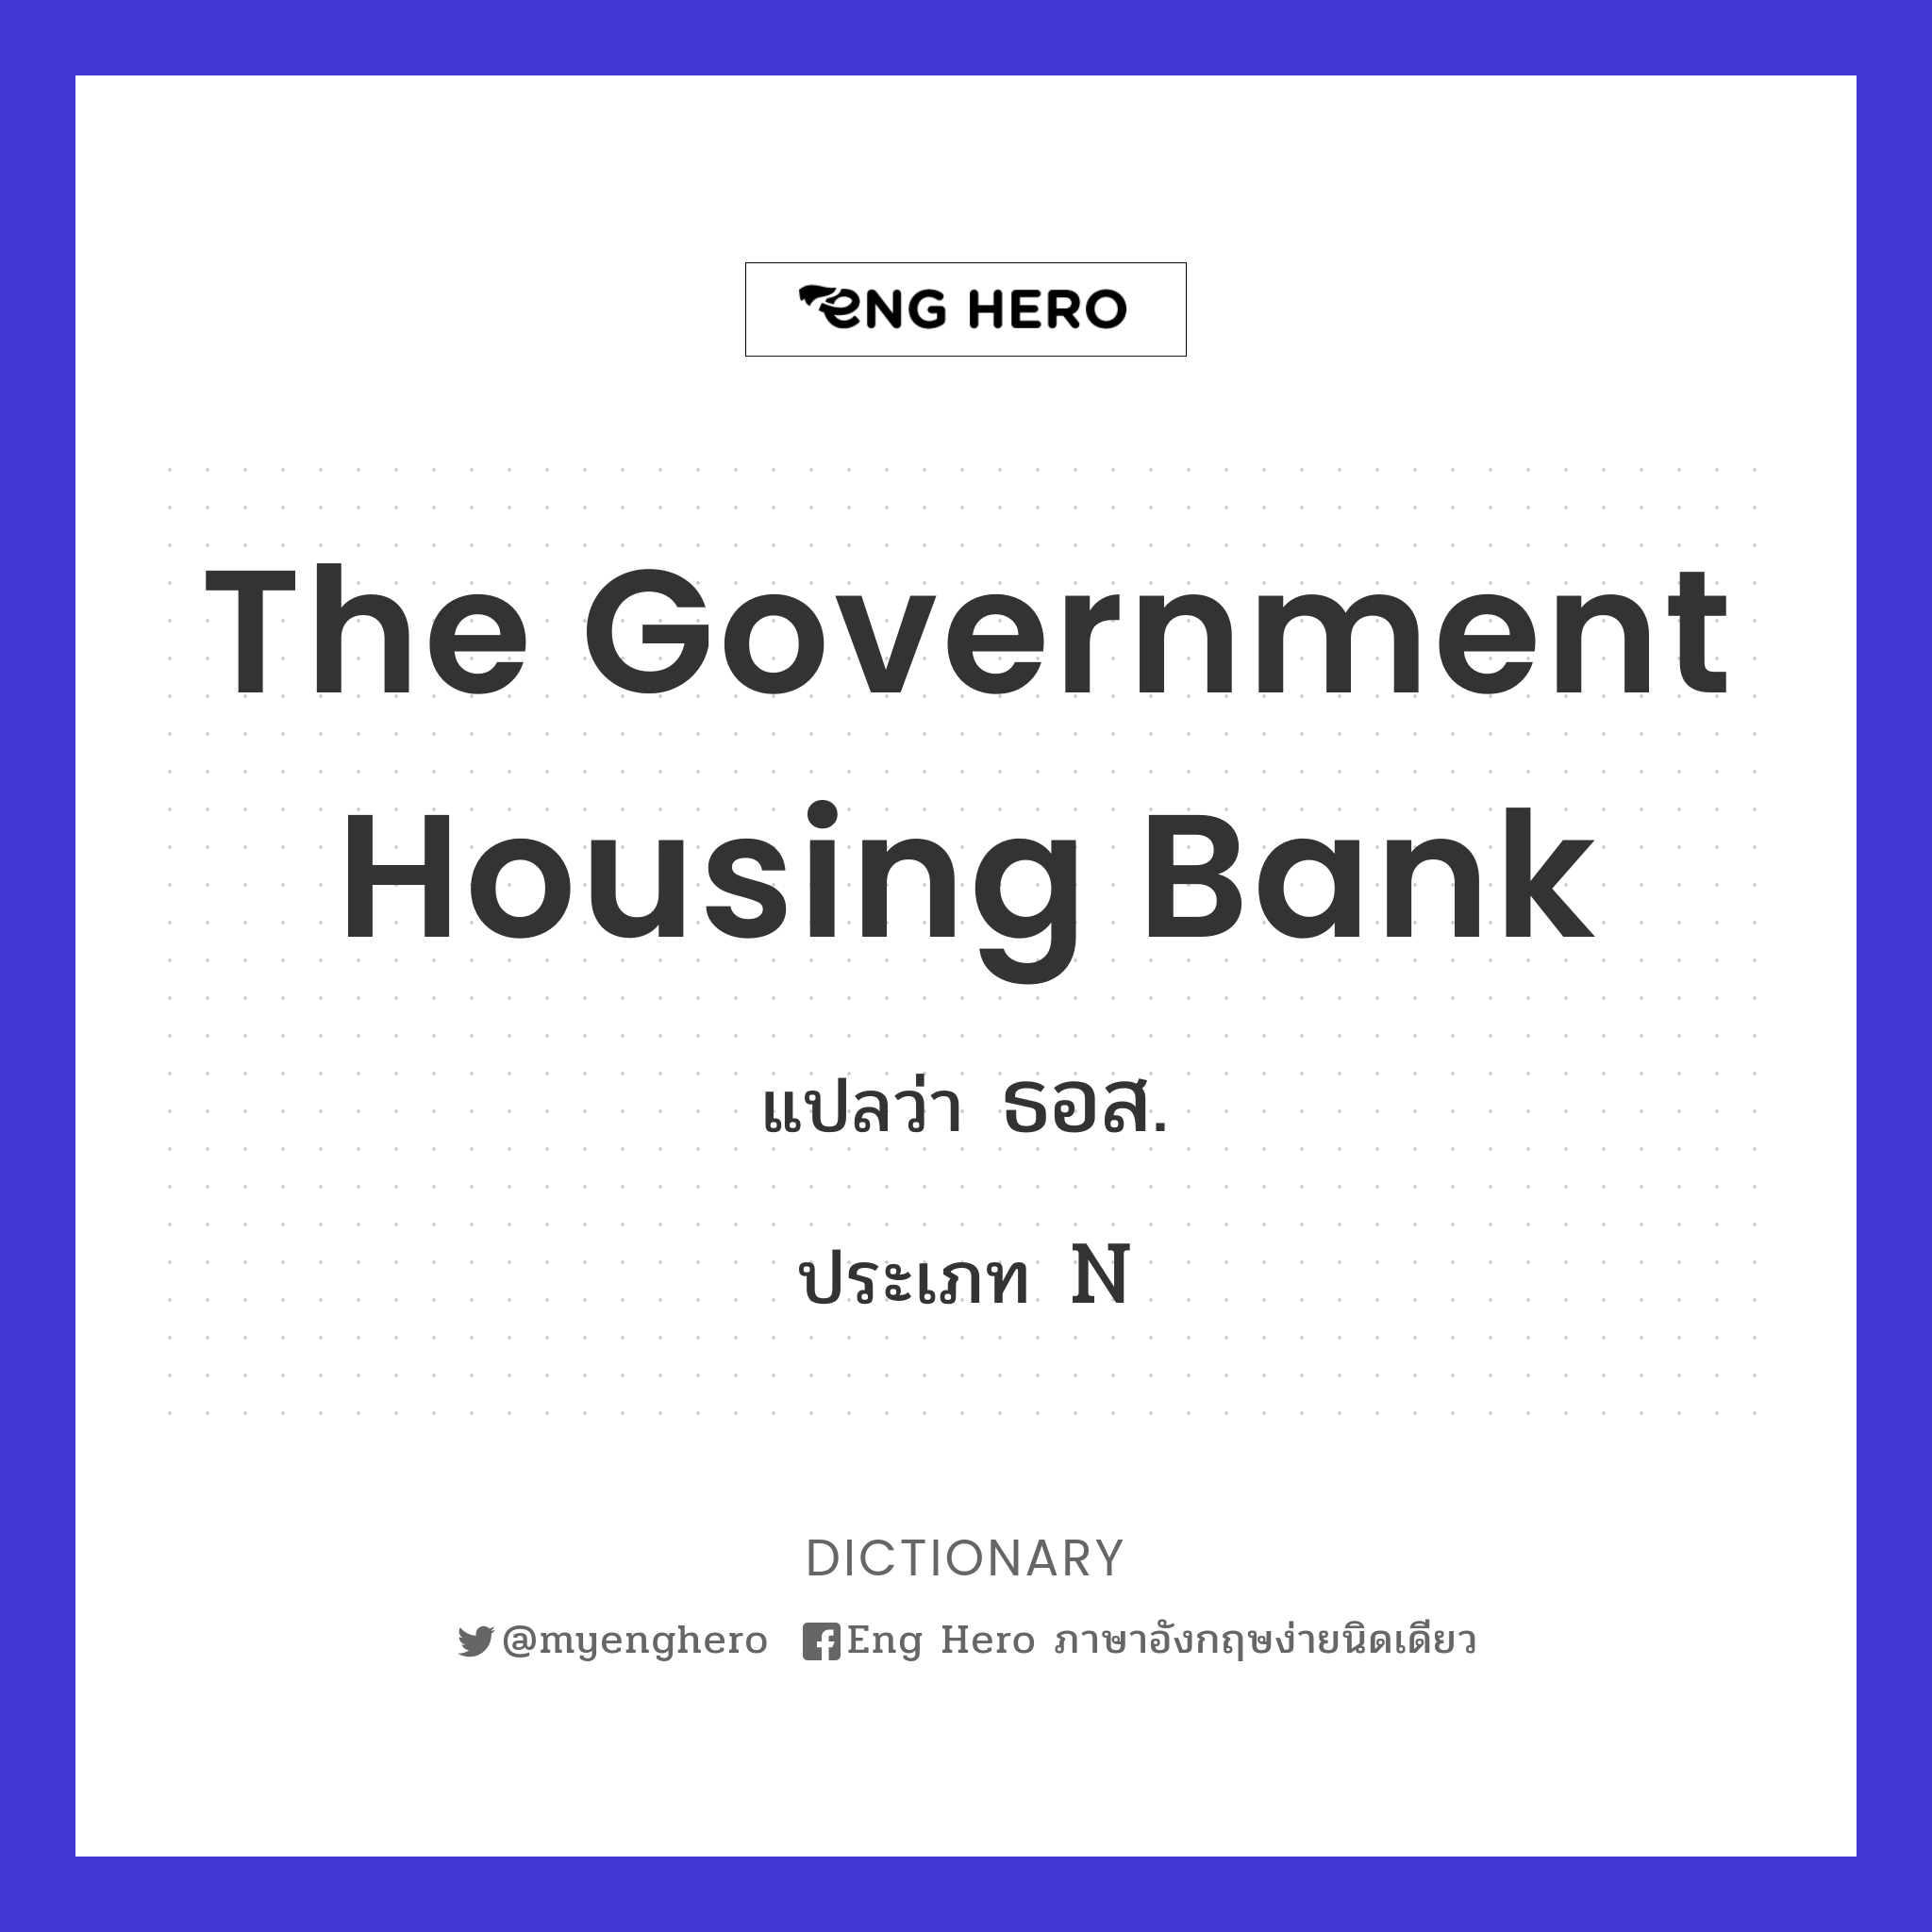 The Government Housing Bank